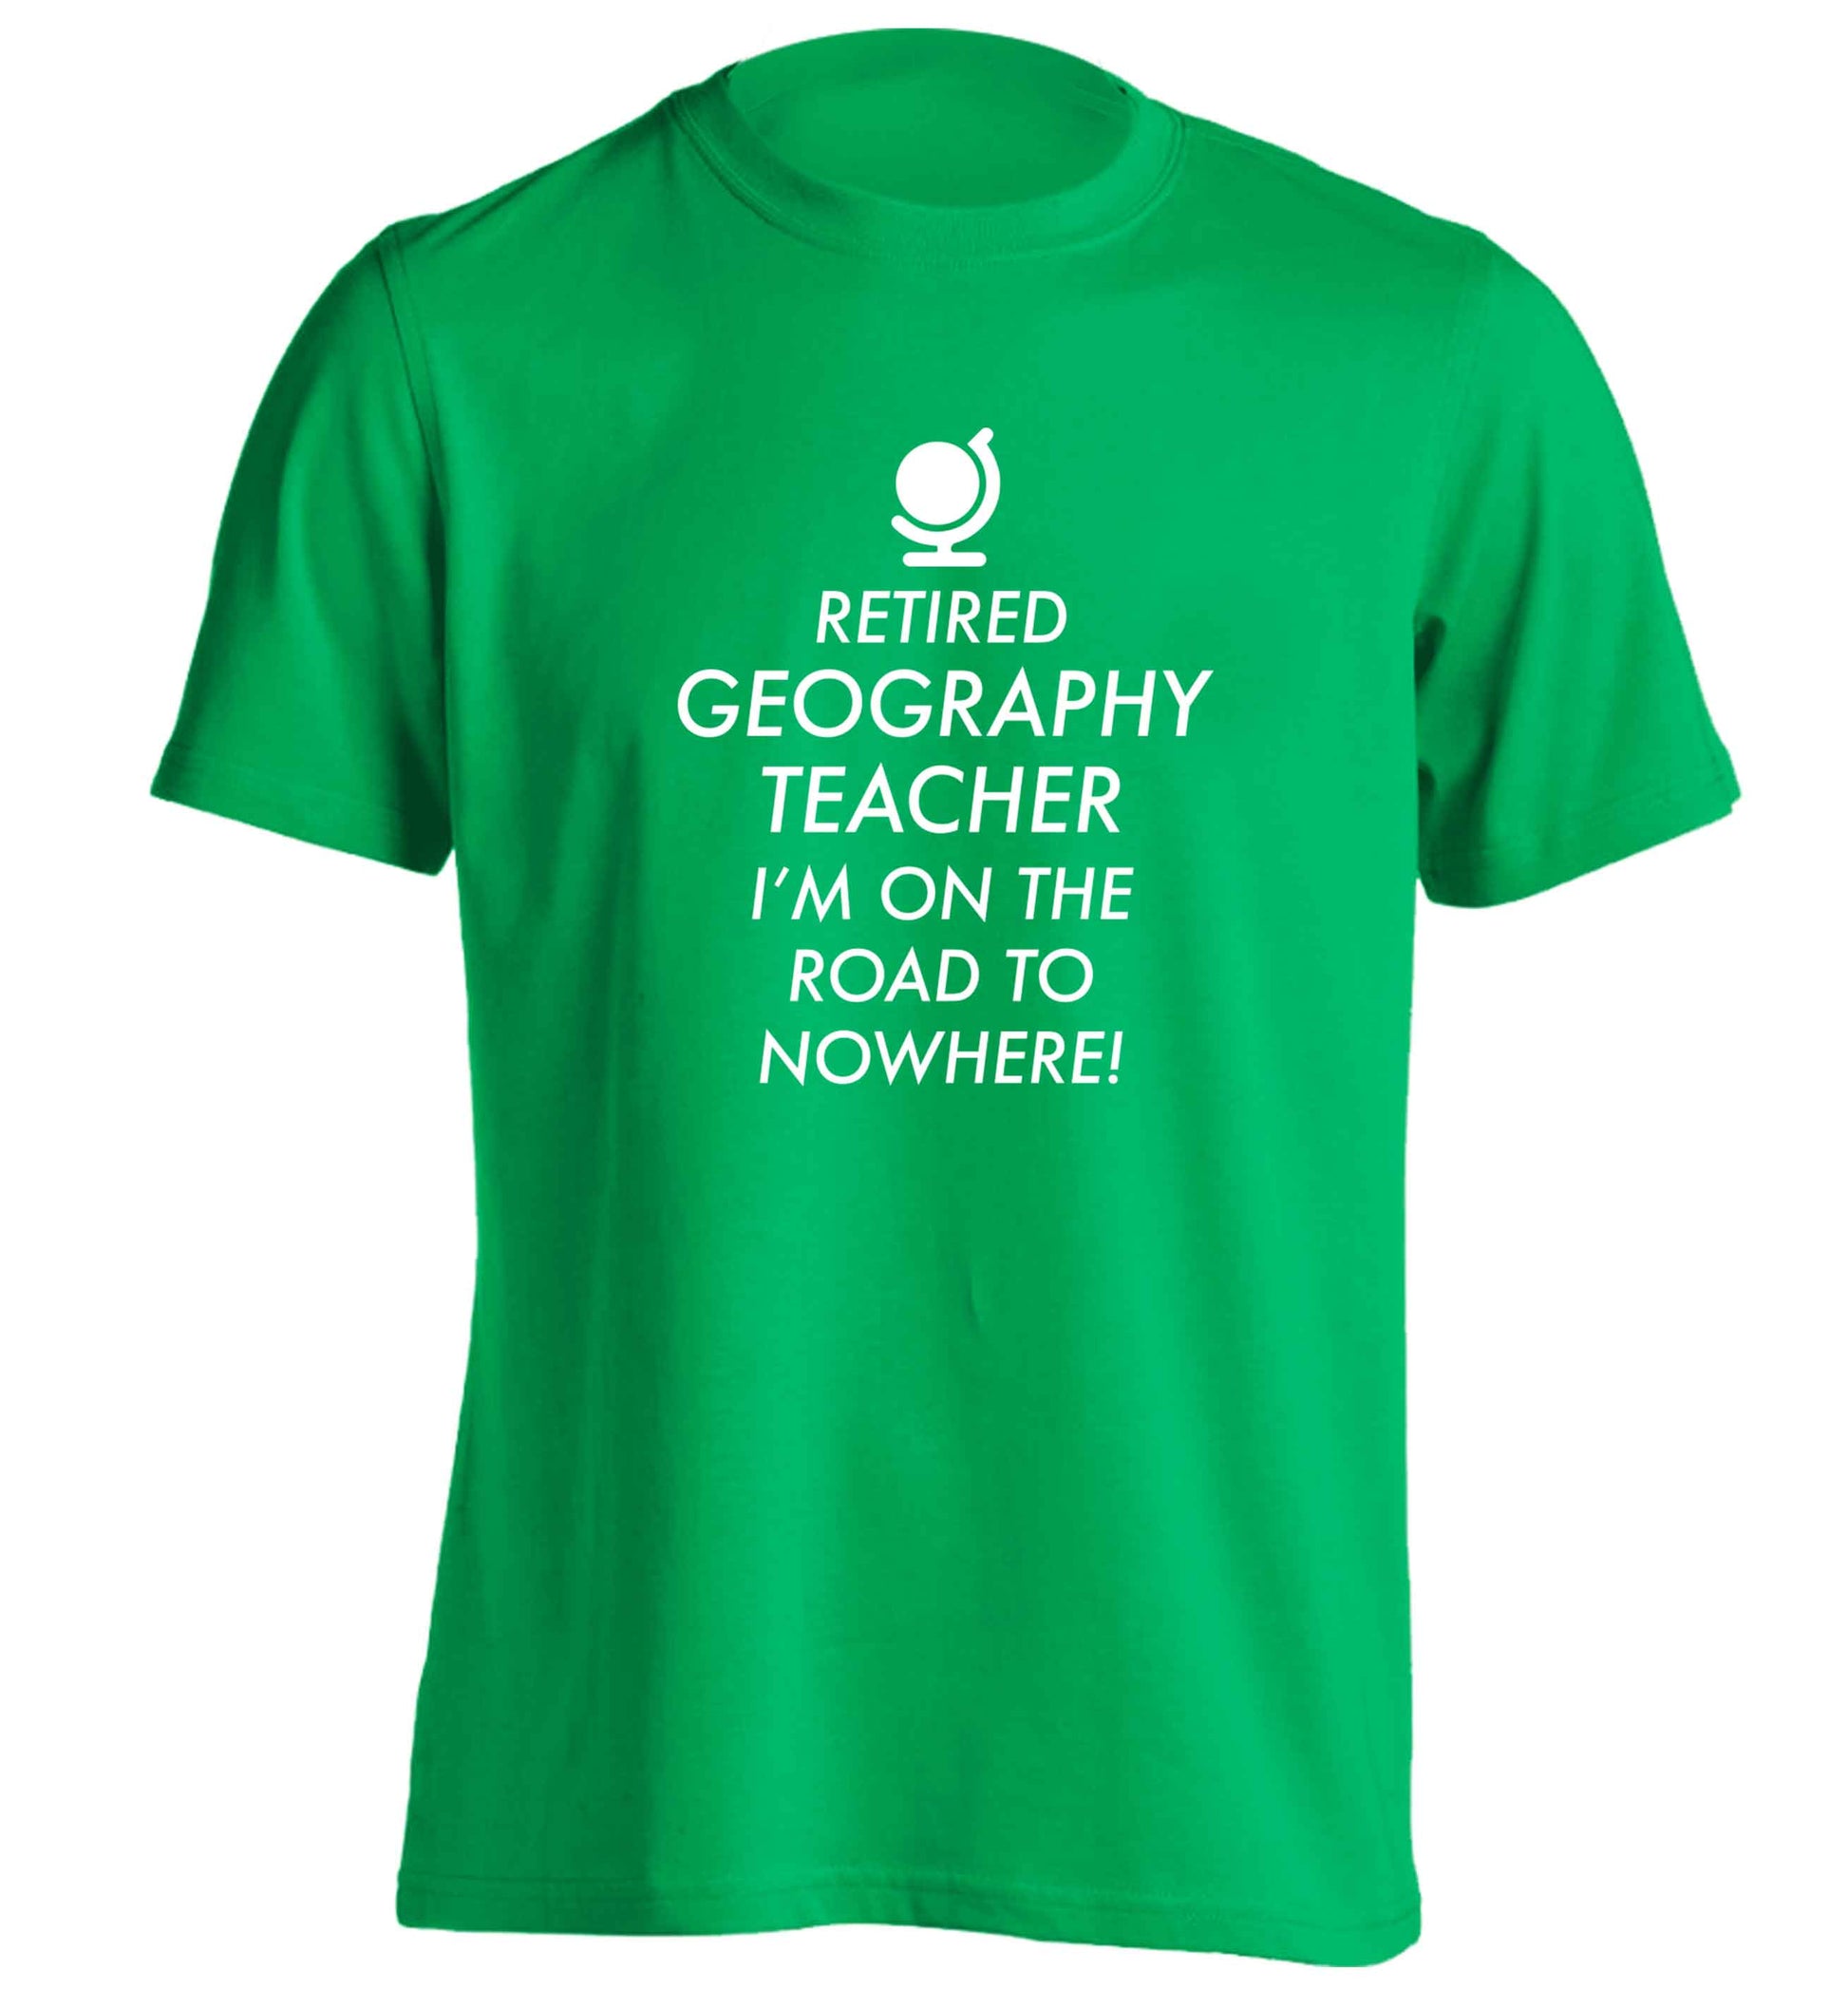 Retired geography teacher I'm on the road to nowhere adults unisex green Tshirt 2XL